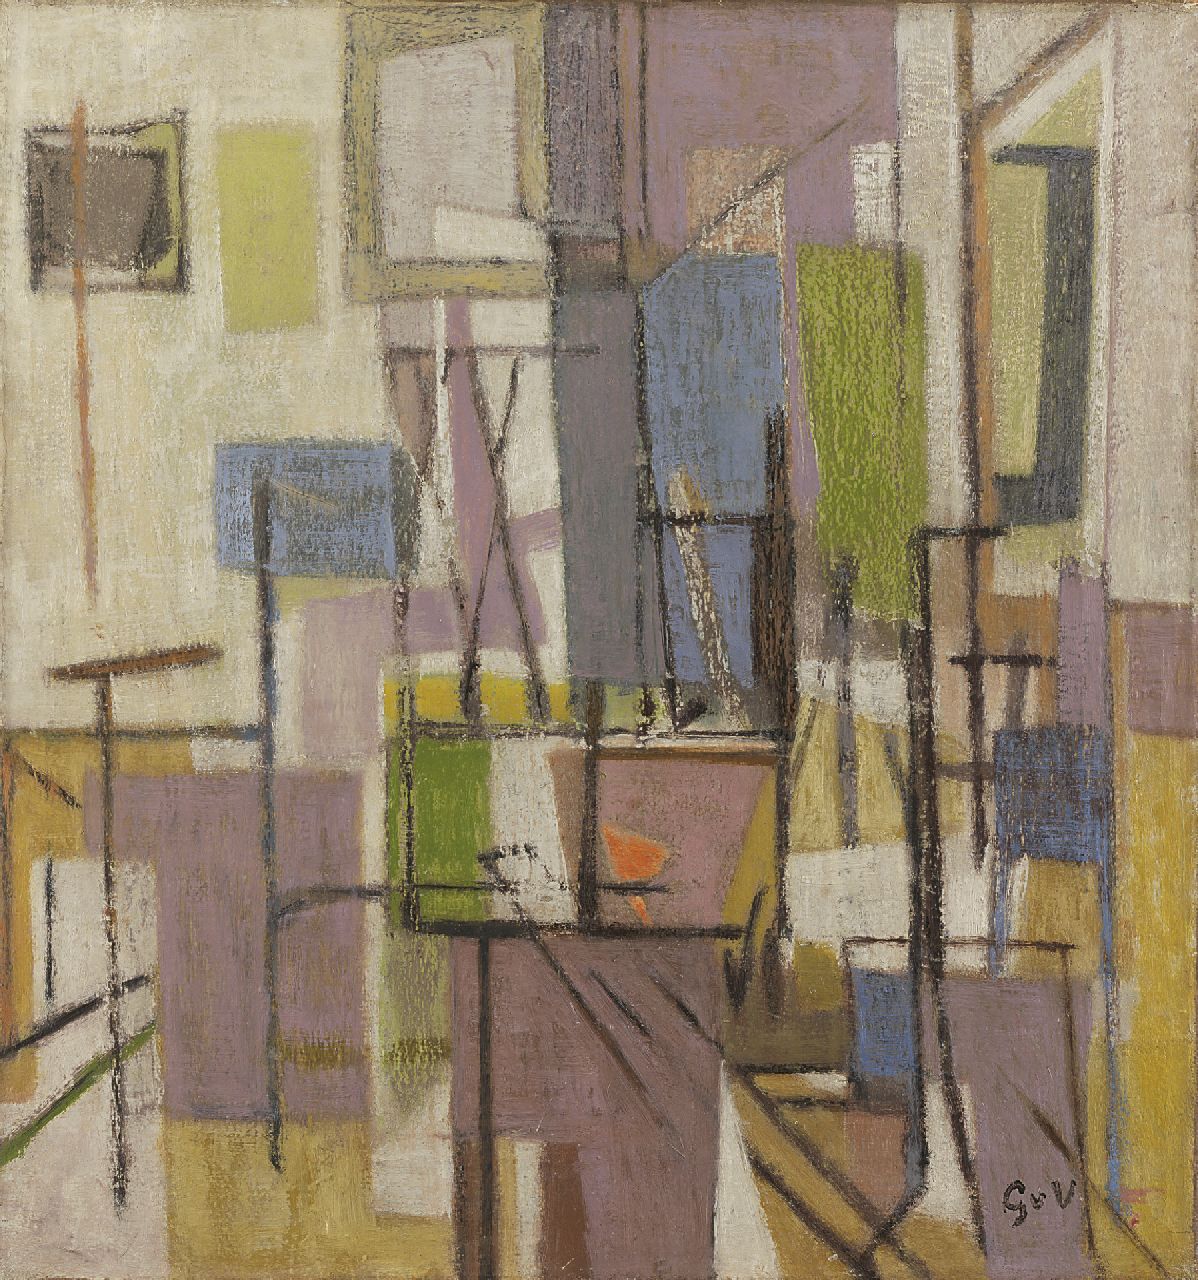 Velde G. van | Gerardus 'Geer' van Velde, Composition, oil on canvas 48.2 x 45.5 cm, signed l.r. with initials and in full on the reverse and painted circa 1947